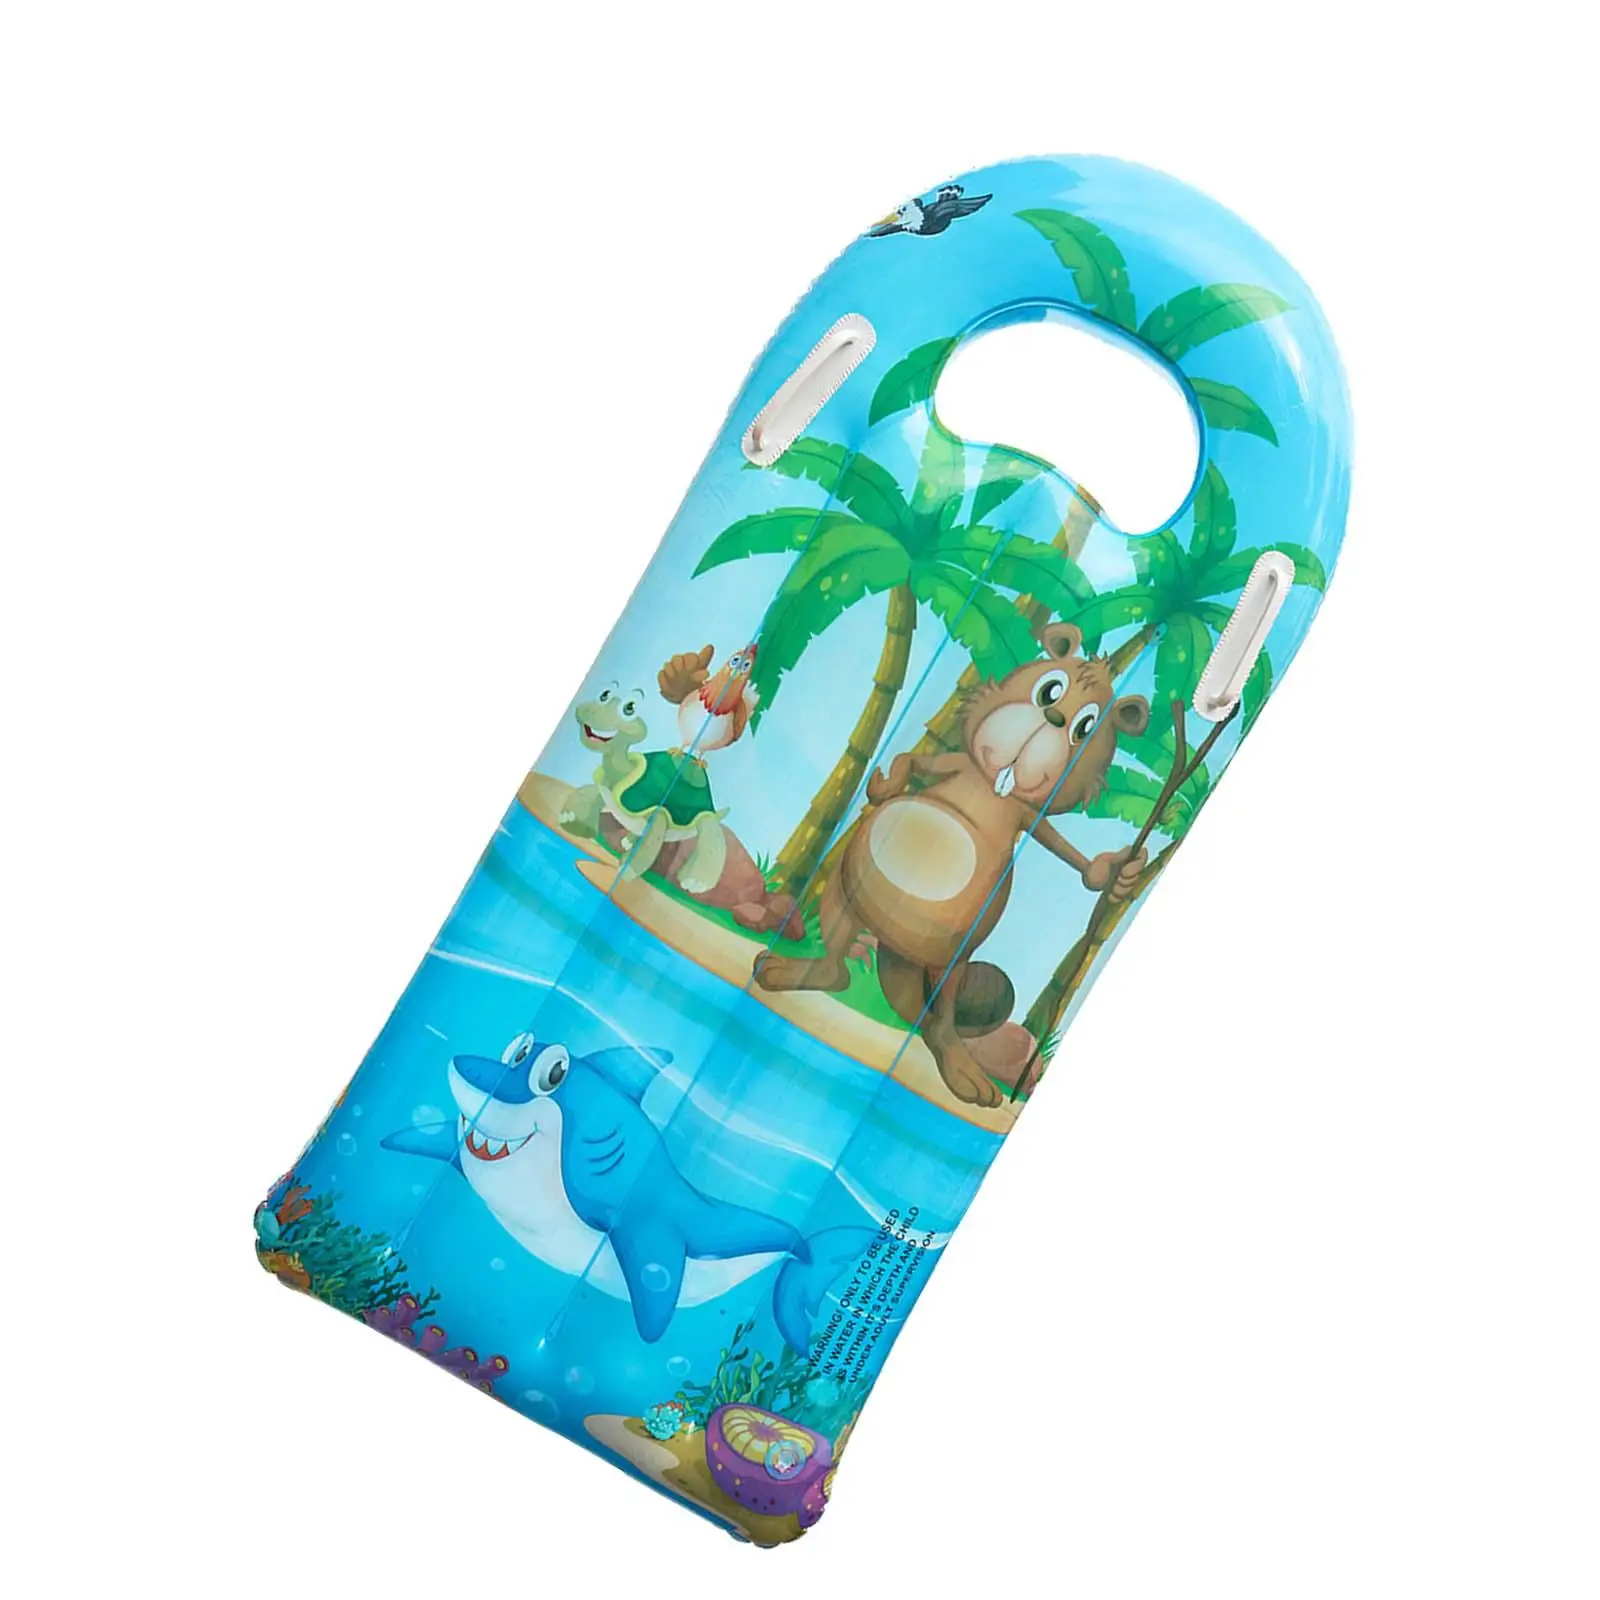 Inflatable Surfboard Bodyboards Pool Toy, Pool Floating Floating Surfboard, with